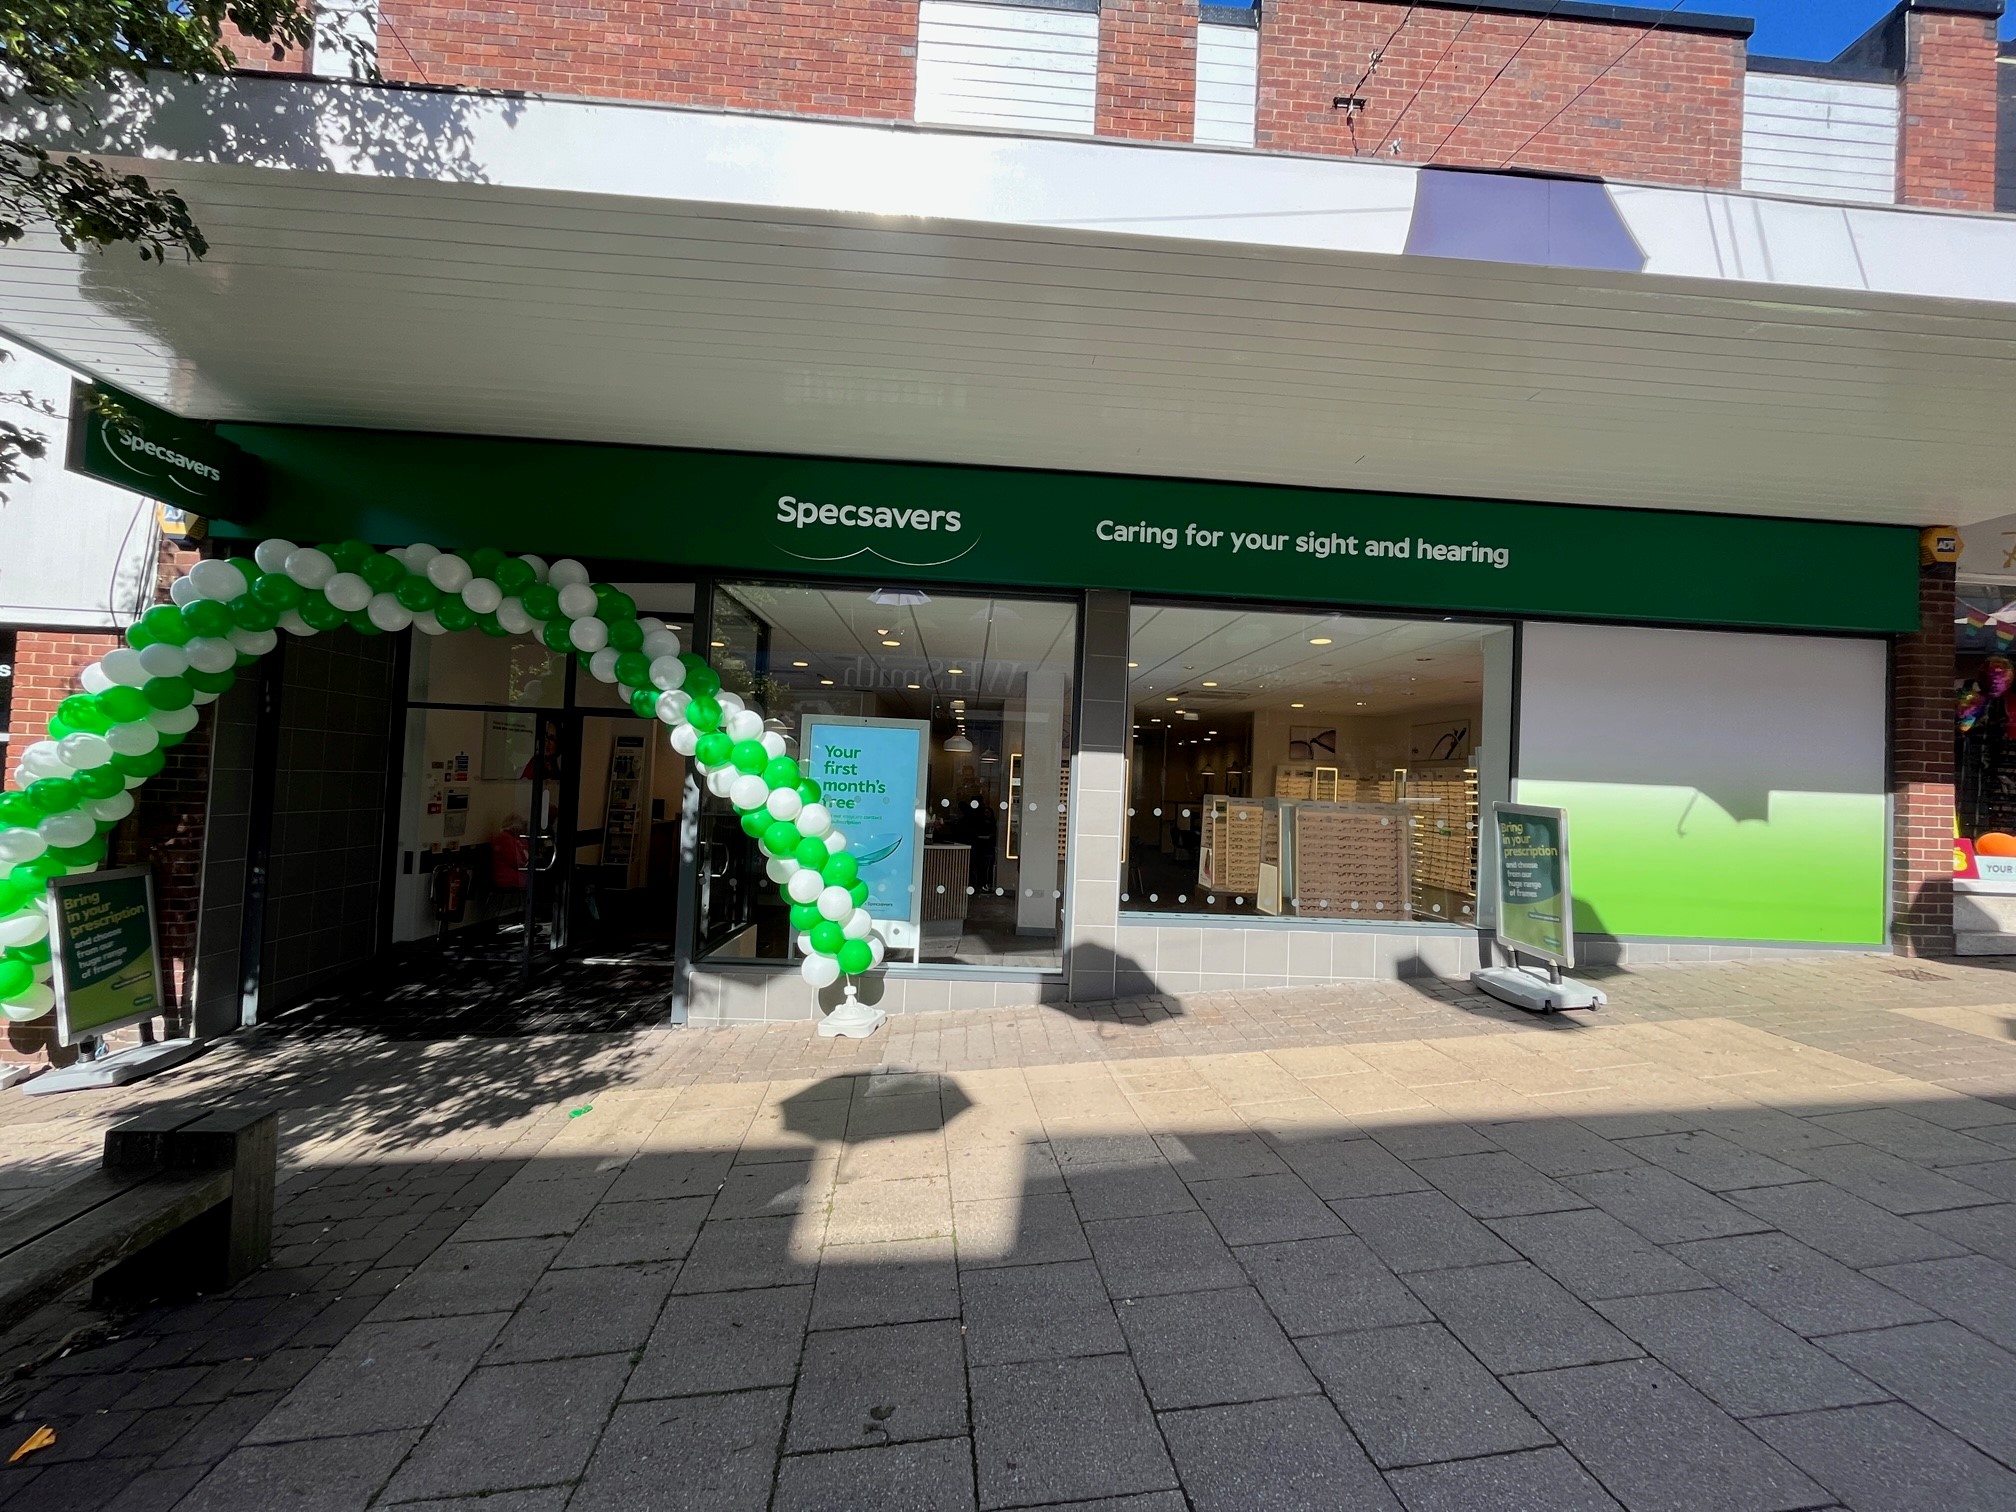 Specsavers Opticians and Audiologists - Alfreton Specsavers Opticians and Audiologists - Alfreton Alfreton 01773 523070